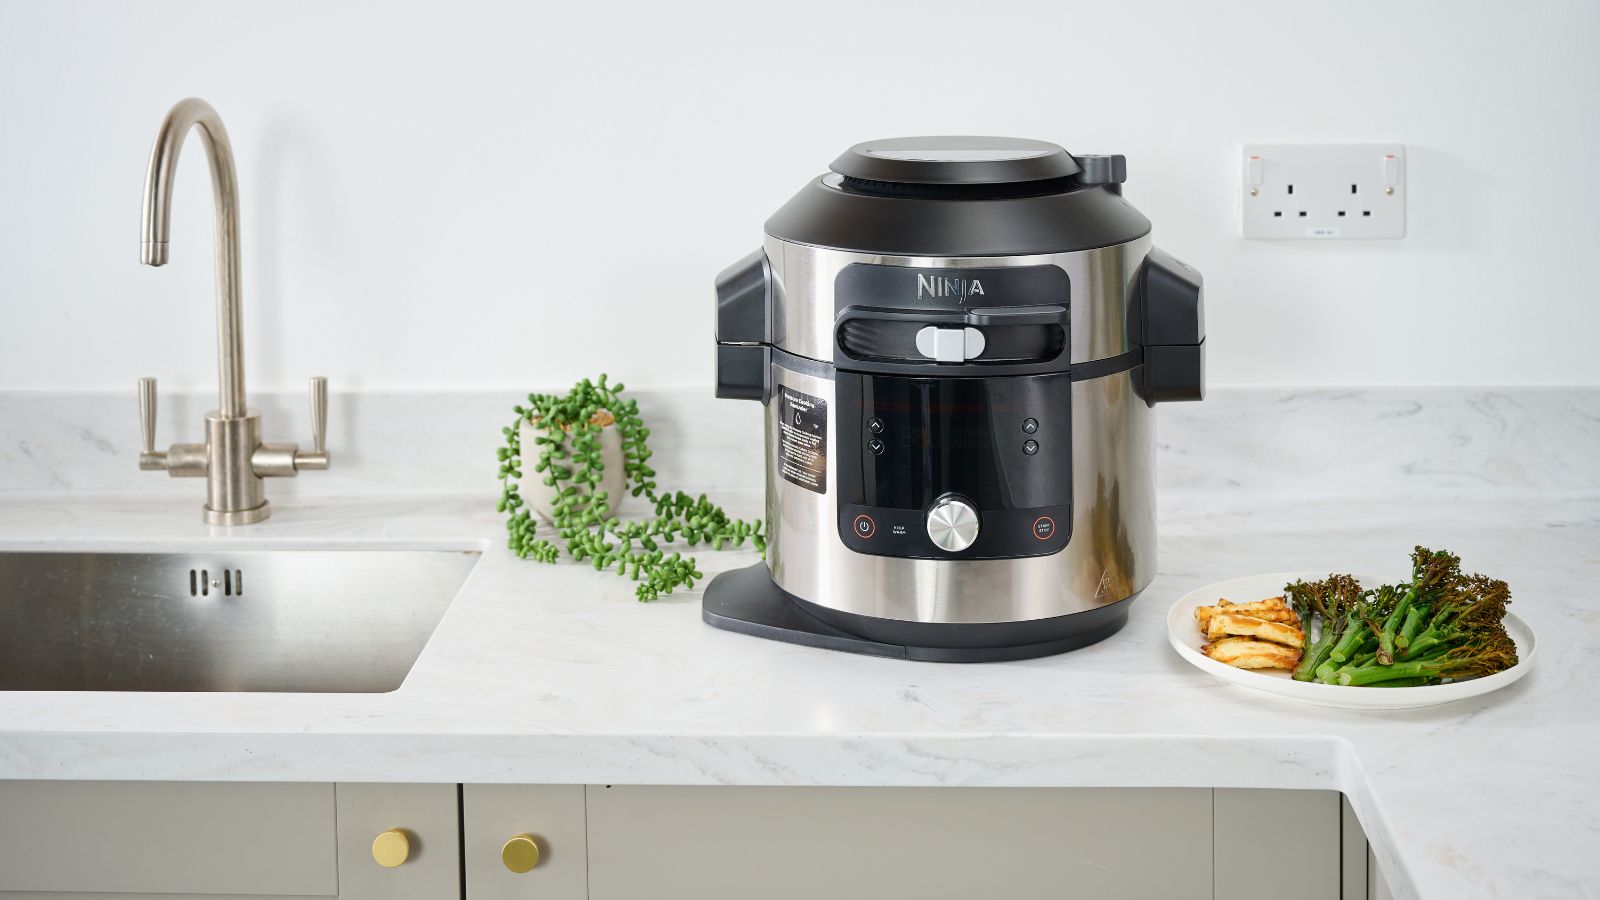 This Ninja Foodi pressure cooker is $90 off for Black Friday